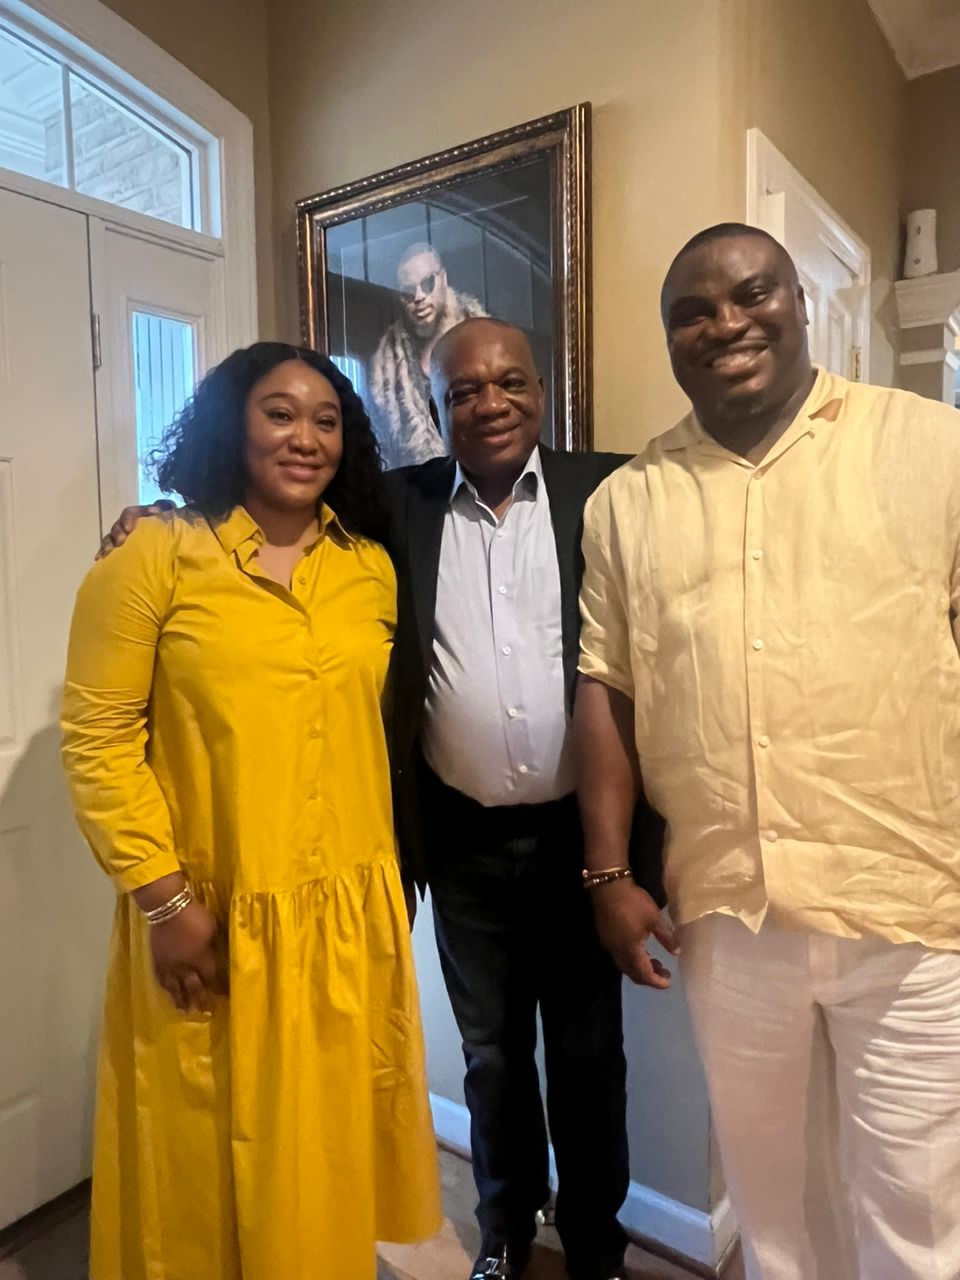 The duo of former governor of Abia State, Dr. Orji Kalu and a former governorship aspirant, Mayor Lucky Igbokwe popularly known as Don Lulu at the